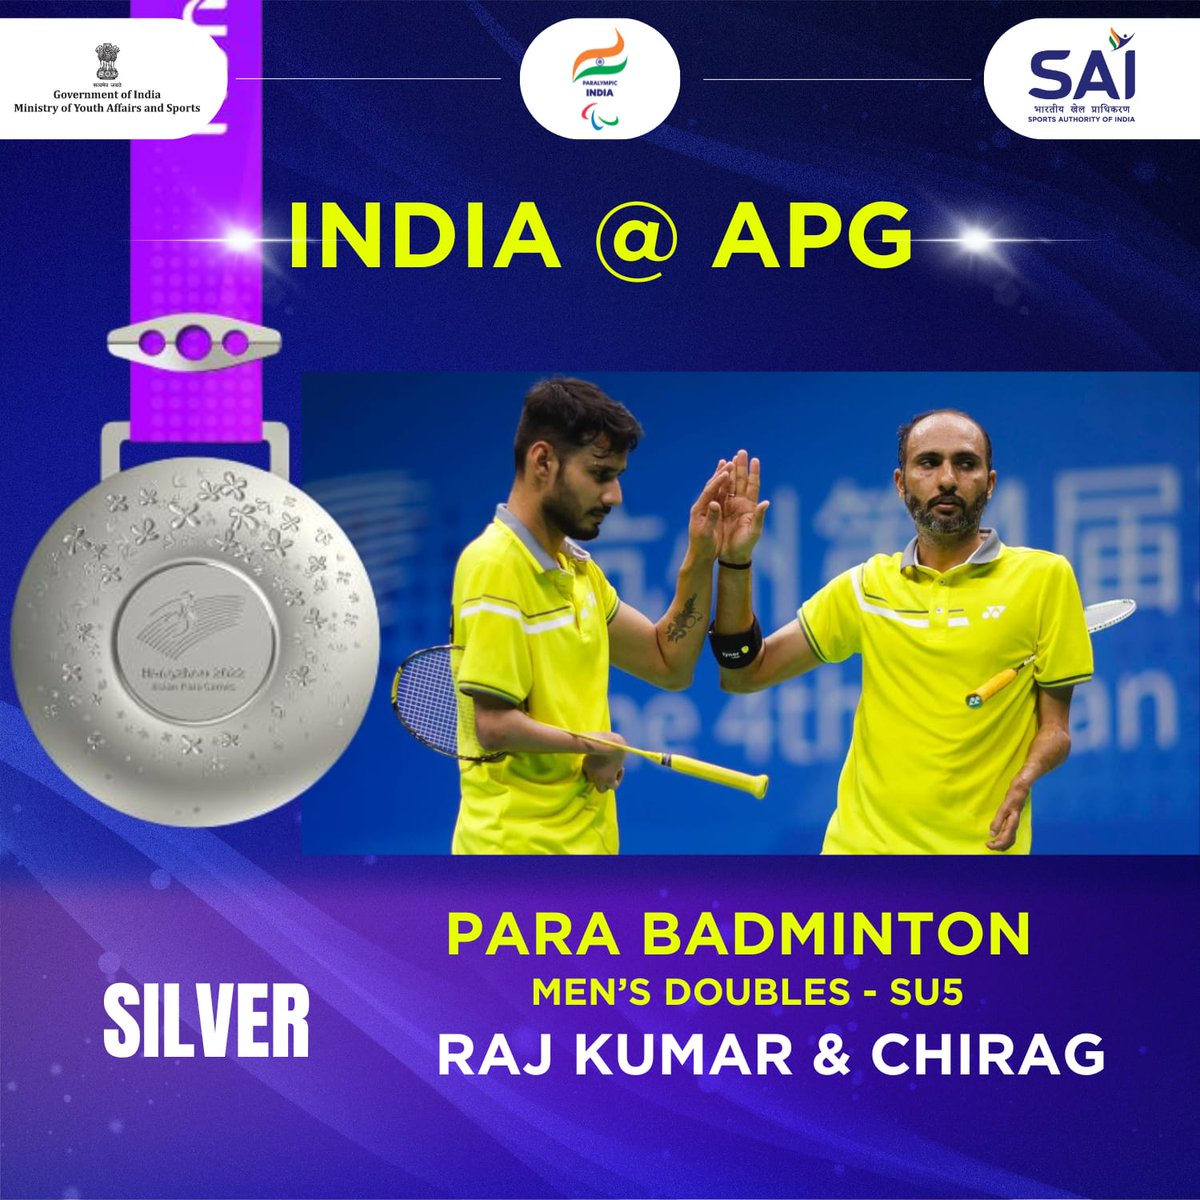 Compliments to @ChiragBaretha and @Rajkuma29040719 for winning the Silver Medal🥈 in Badminton Men's Doubles SU5 category at #AsianParaGames2022!   Your remarkable skills and passion have made us all proud. Wishing you all the best for your future endeavours.